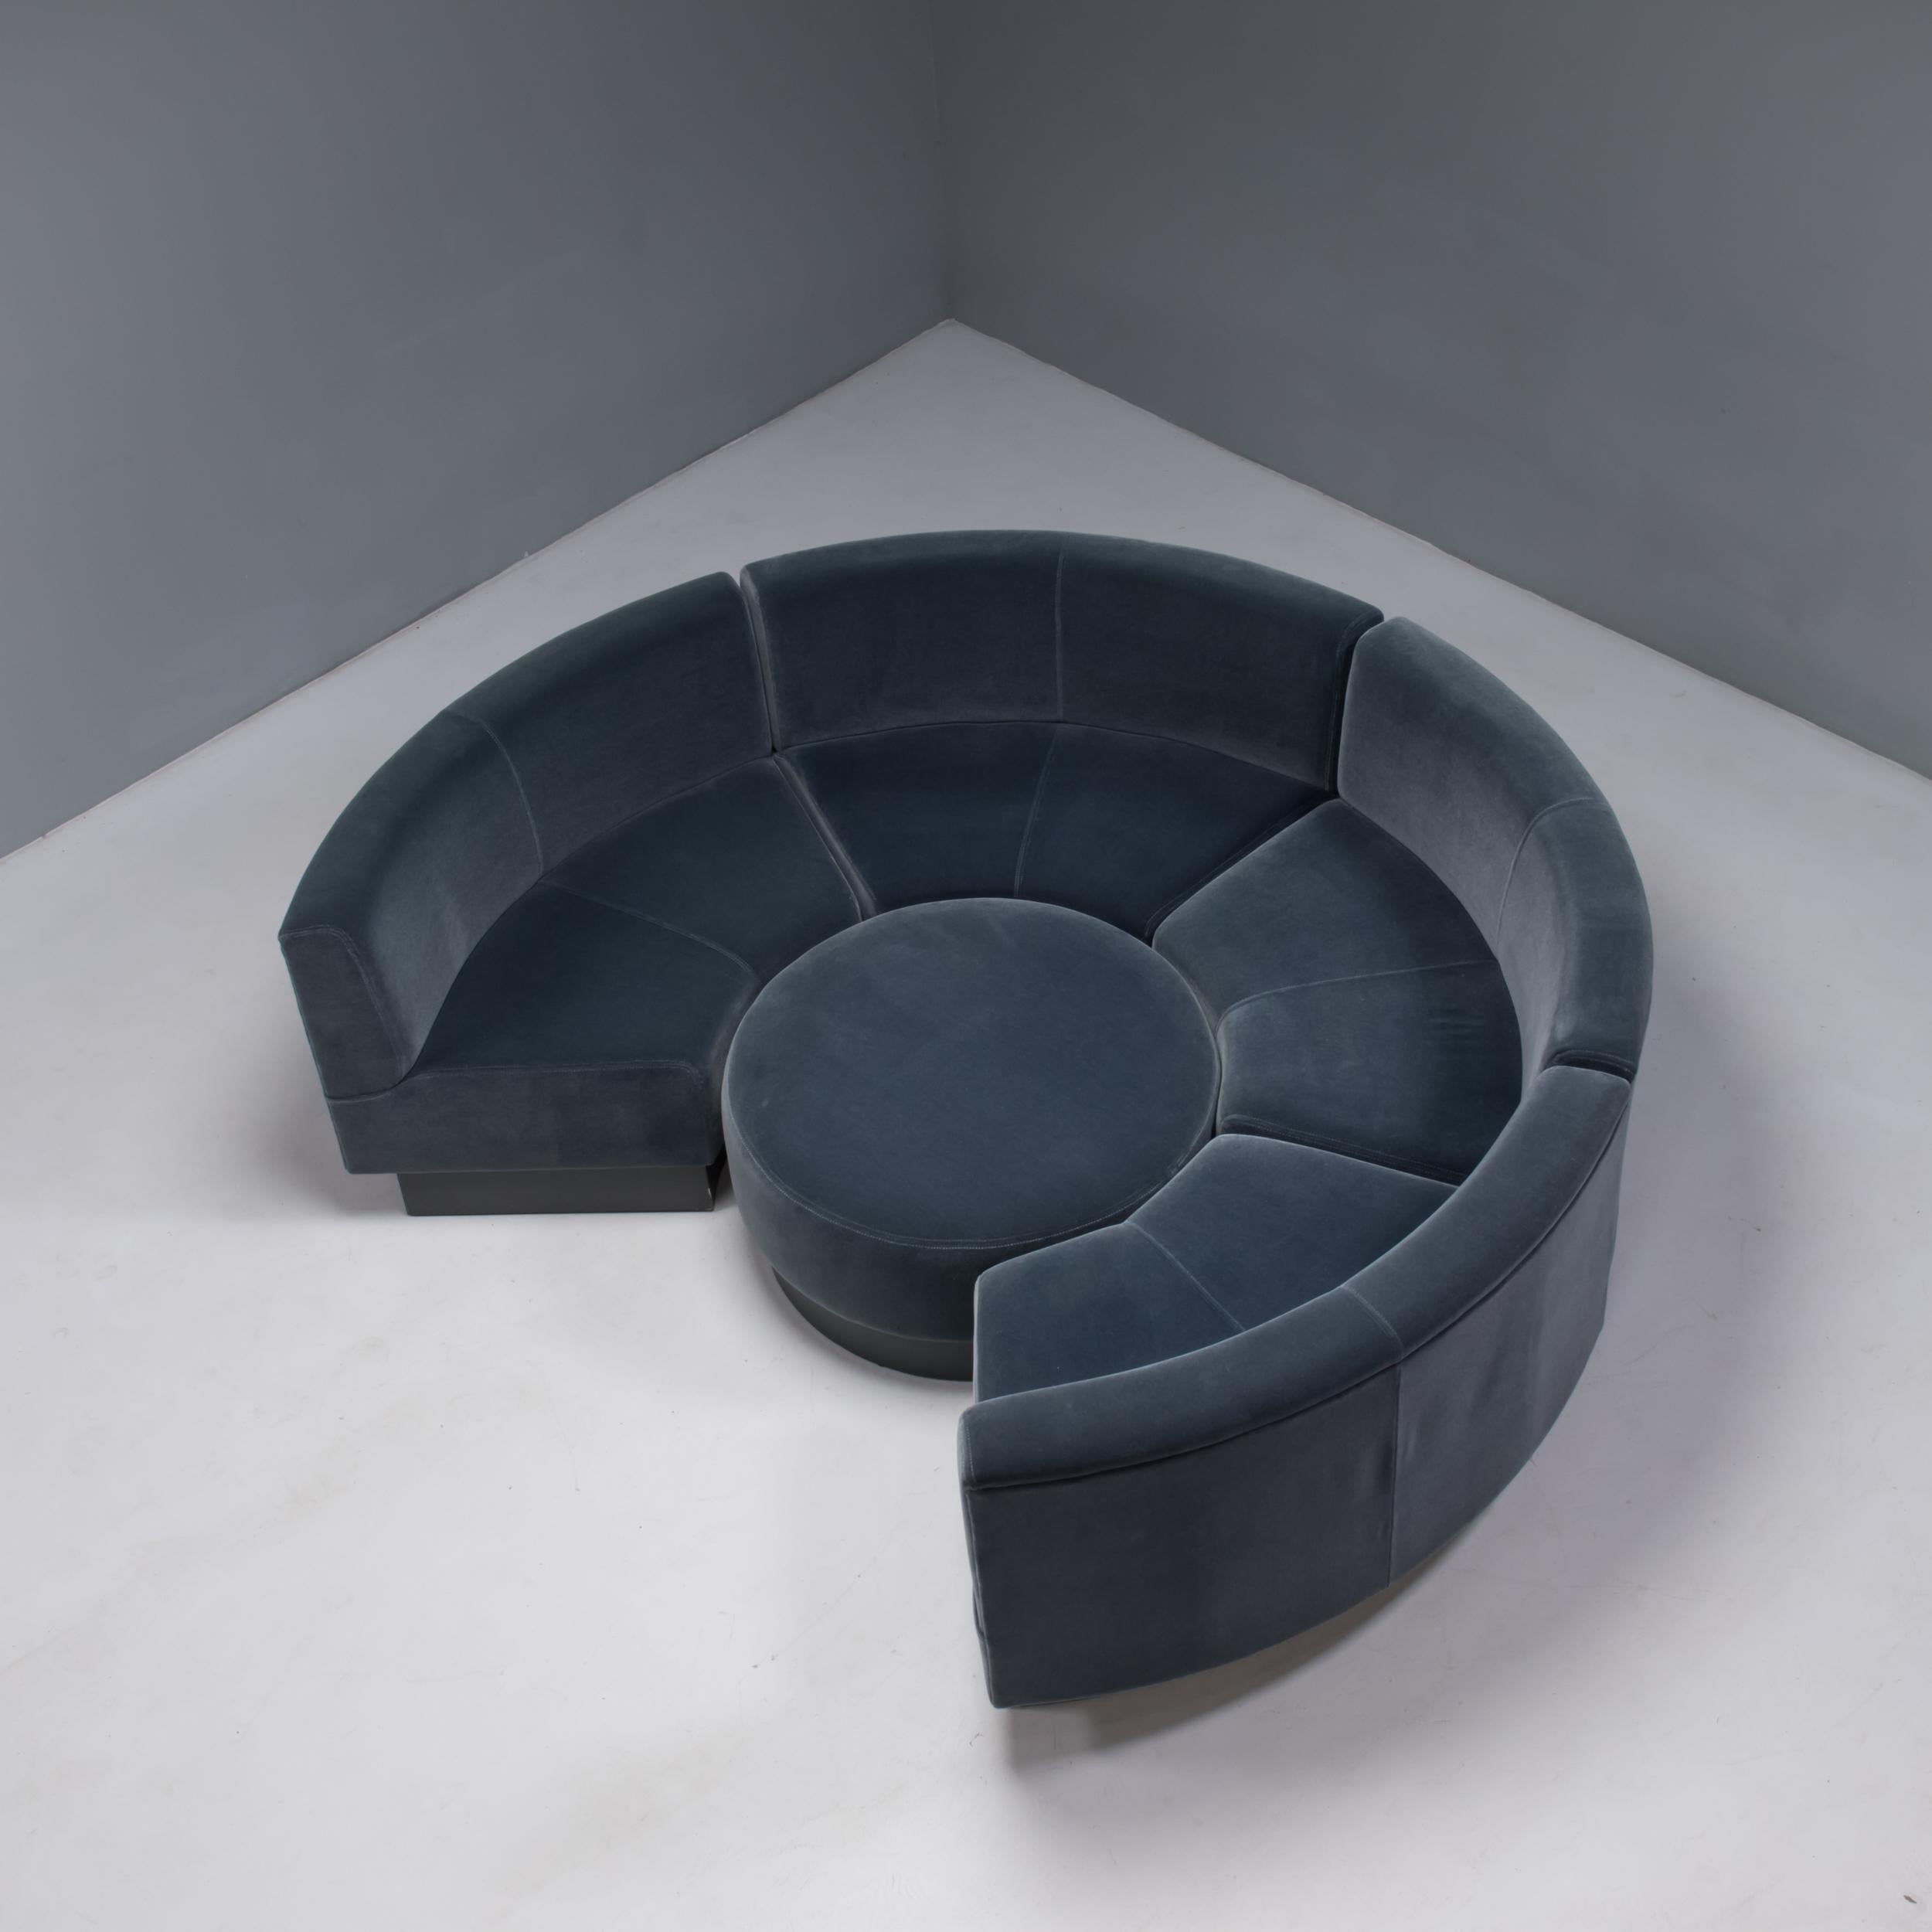 Created as a bespoke commission, this sofa is designed by Ilse Crawford and manufactured by George Smith in the UK, using traditional techniques.

Comprised of four curved modules, the sofa is fully upholstered in grey velvet and fits together to